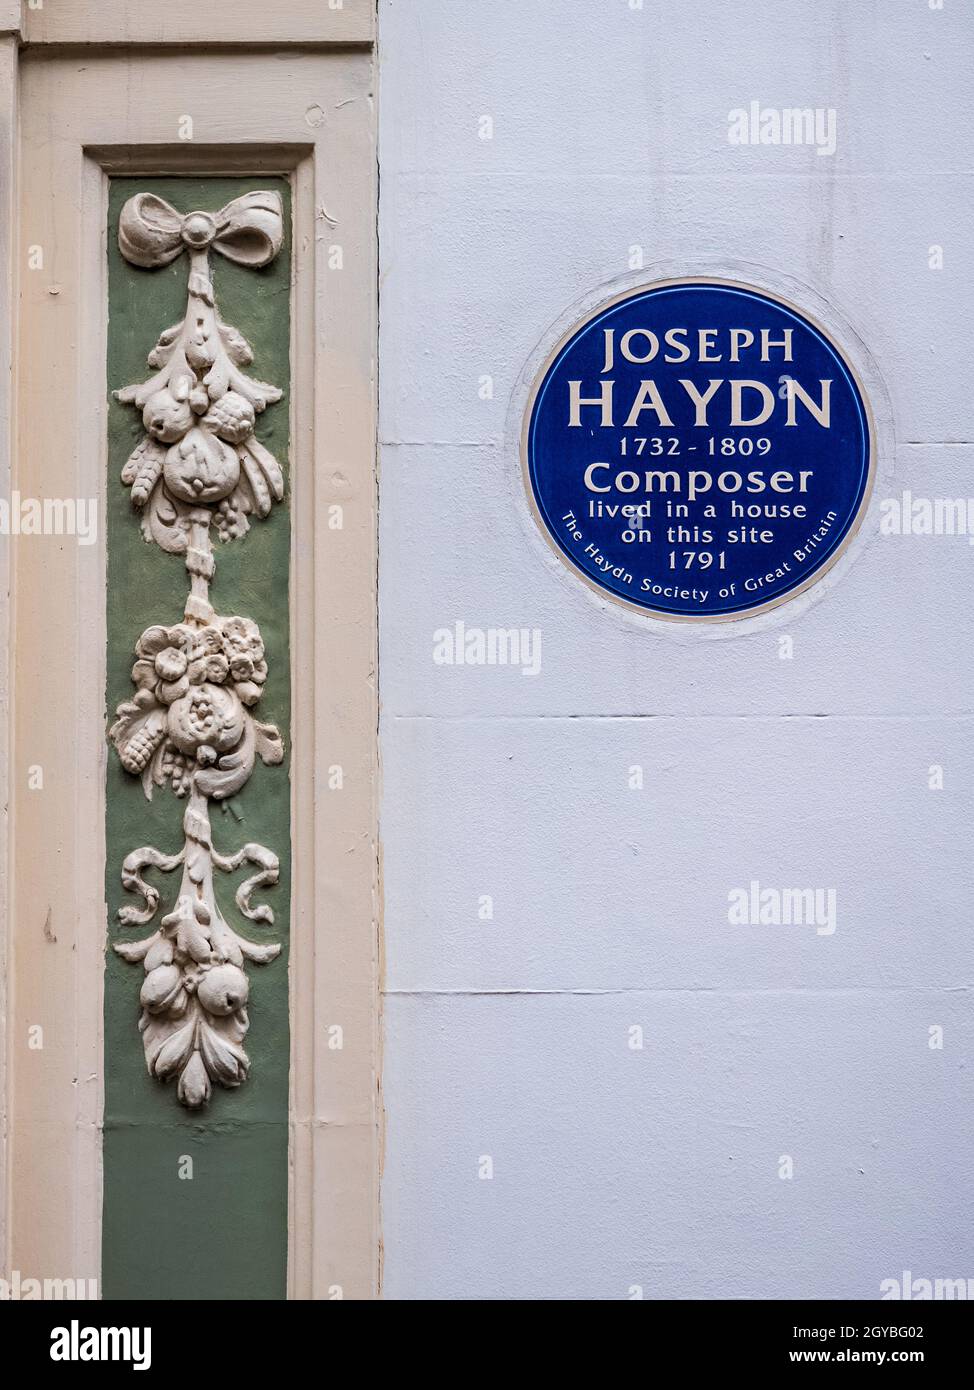 Joseph Haydn Blue Plaque London - Joseph Haydn 1732 -1809 Composer Lived in a house on this site 1791 - by the Haydn Society of Great Britain Stock Photo